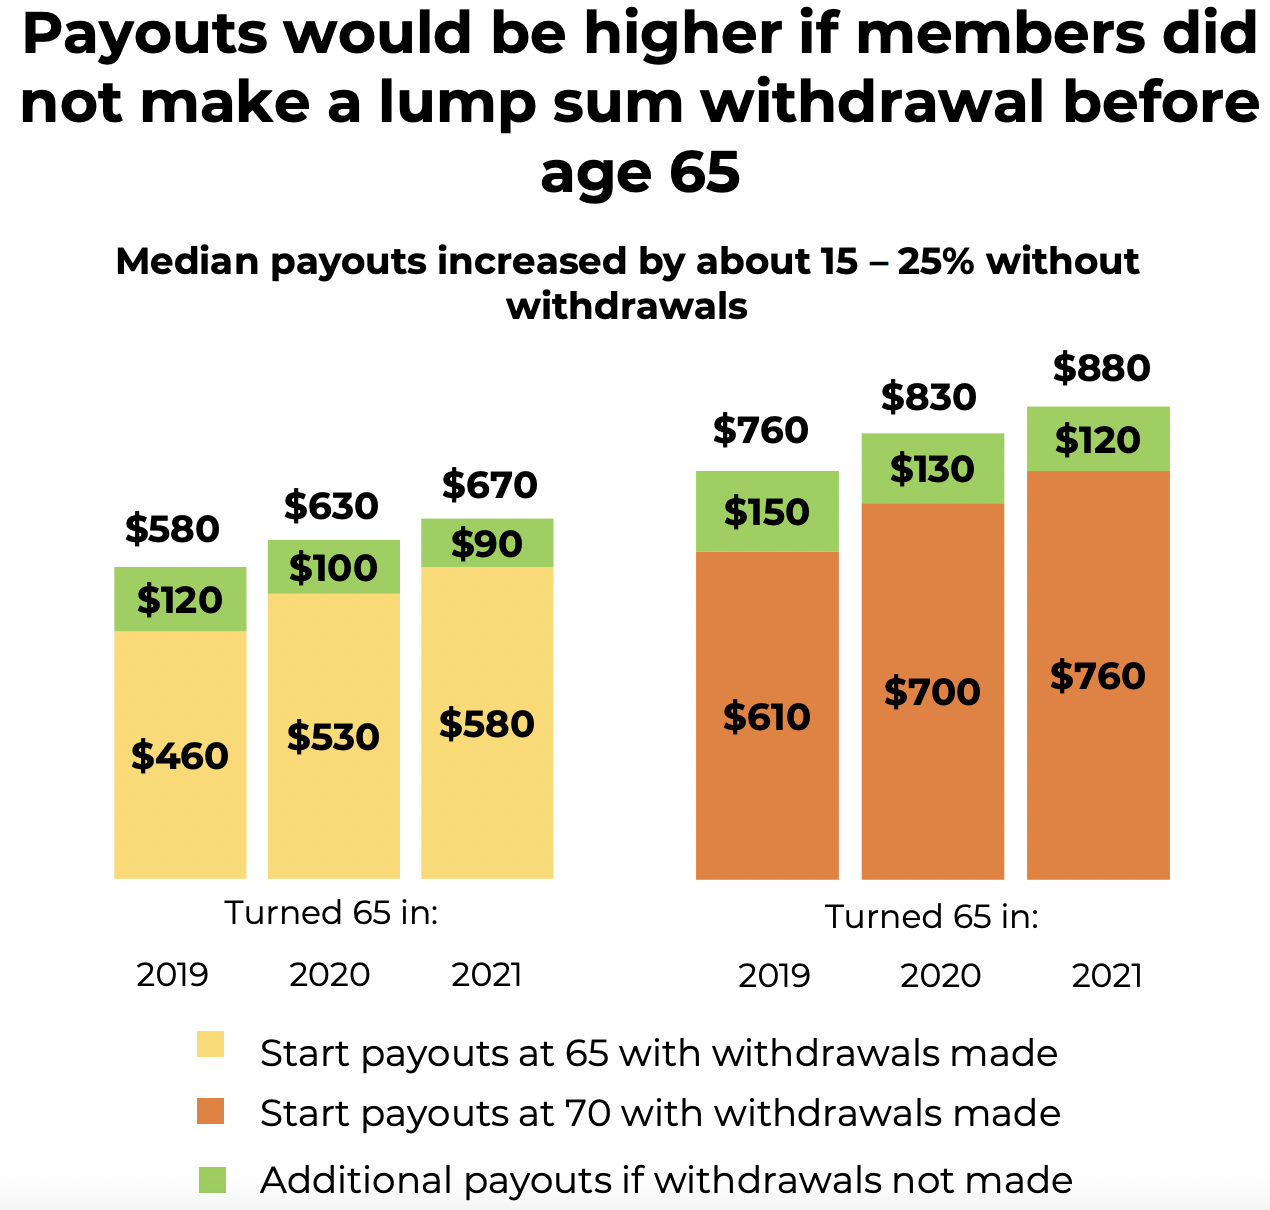 Payouts would be higher if members did not make a lump sum withdrawal before age 65